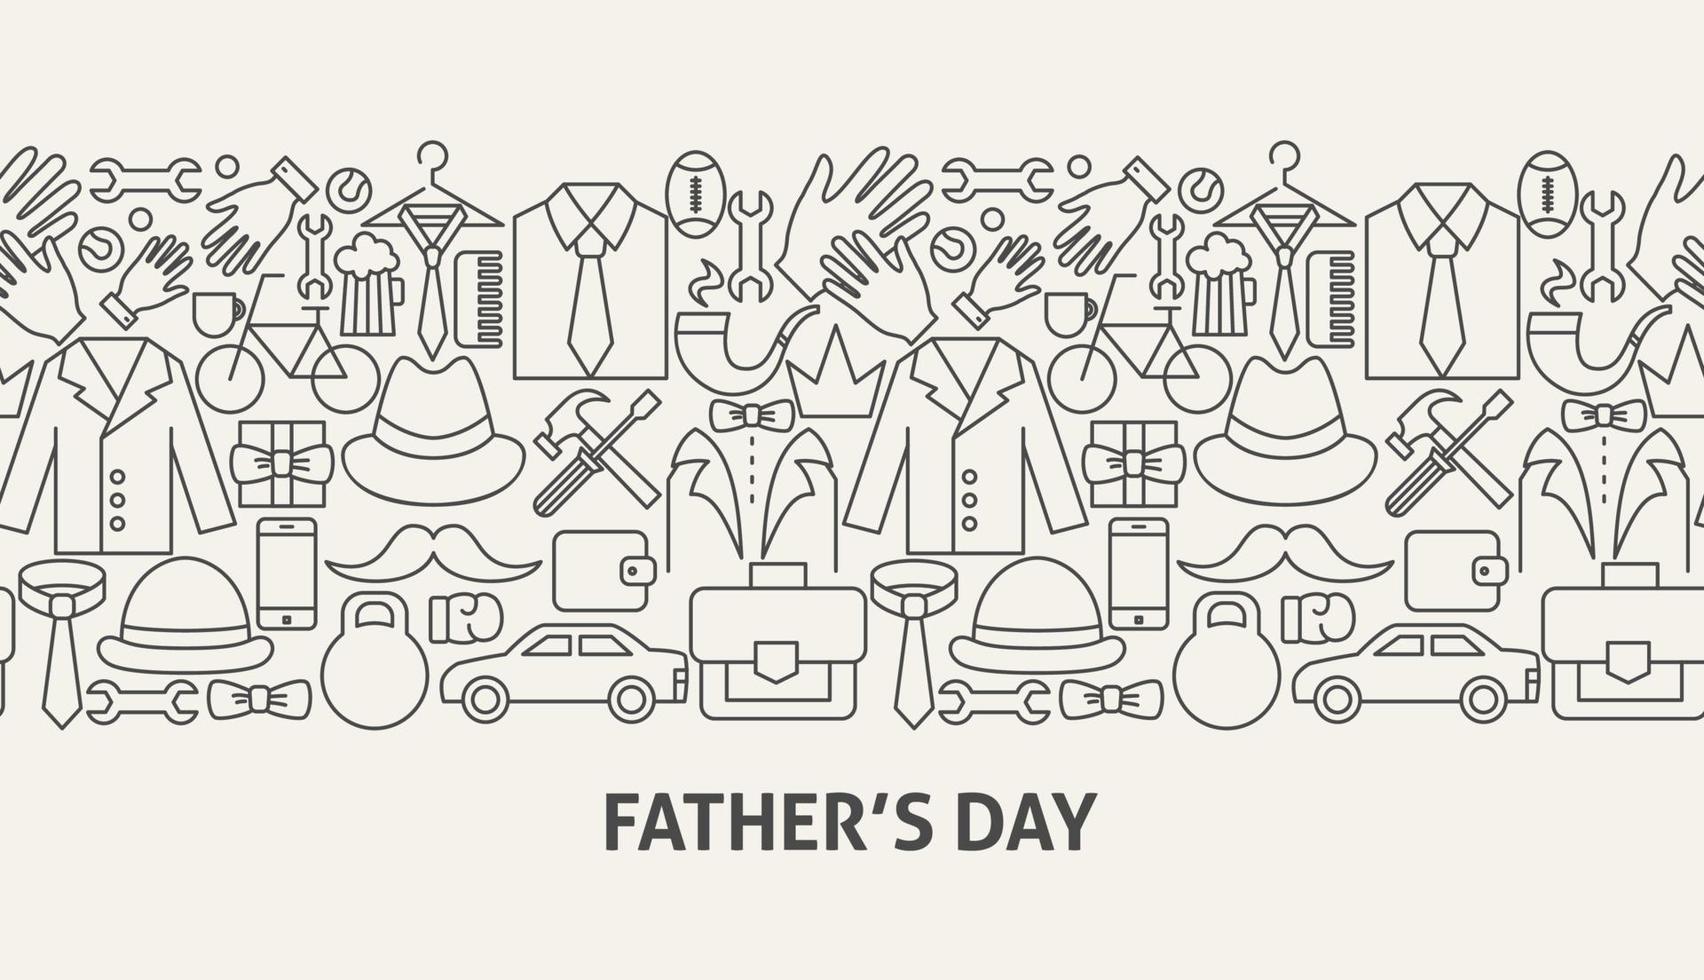 Fathers Day Banner Concept vector